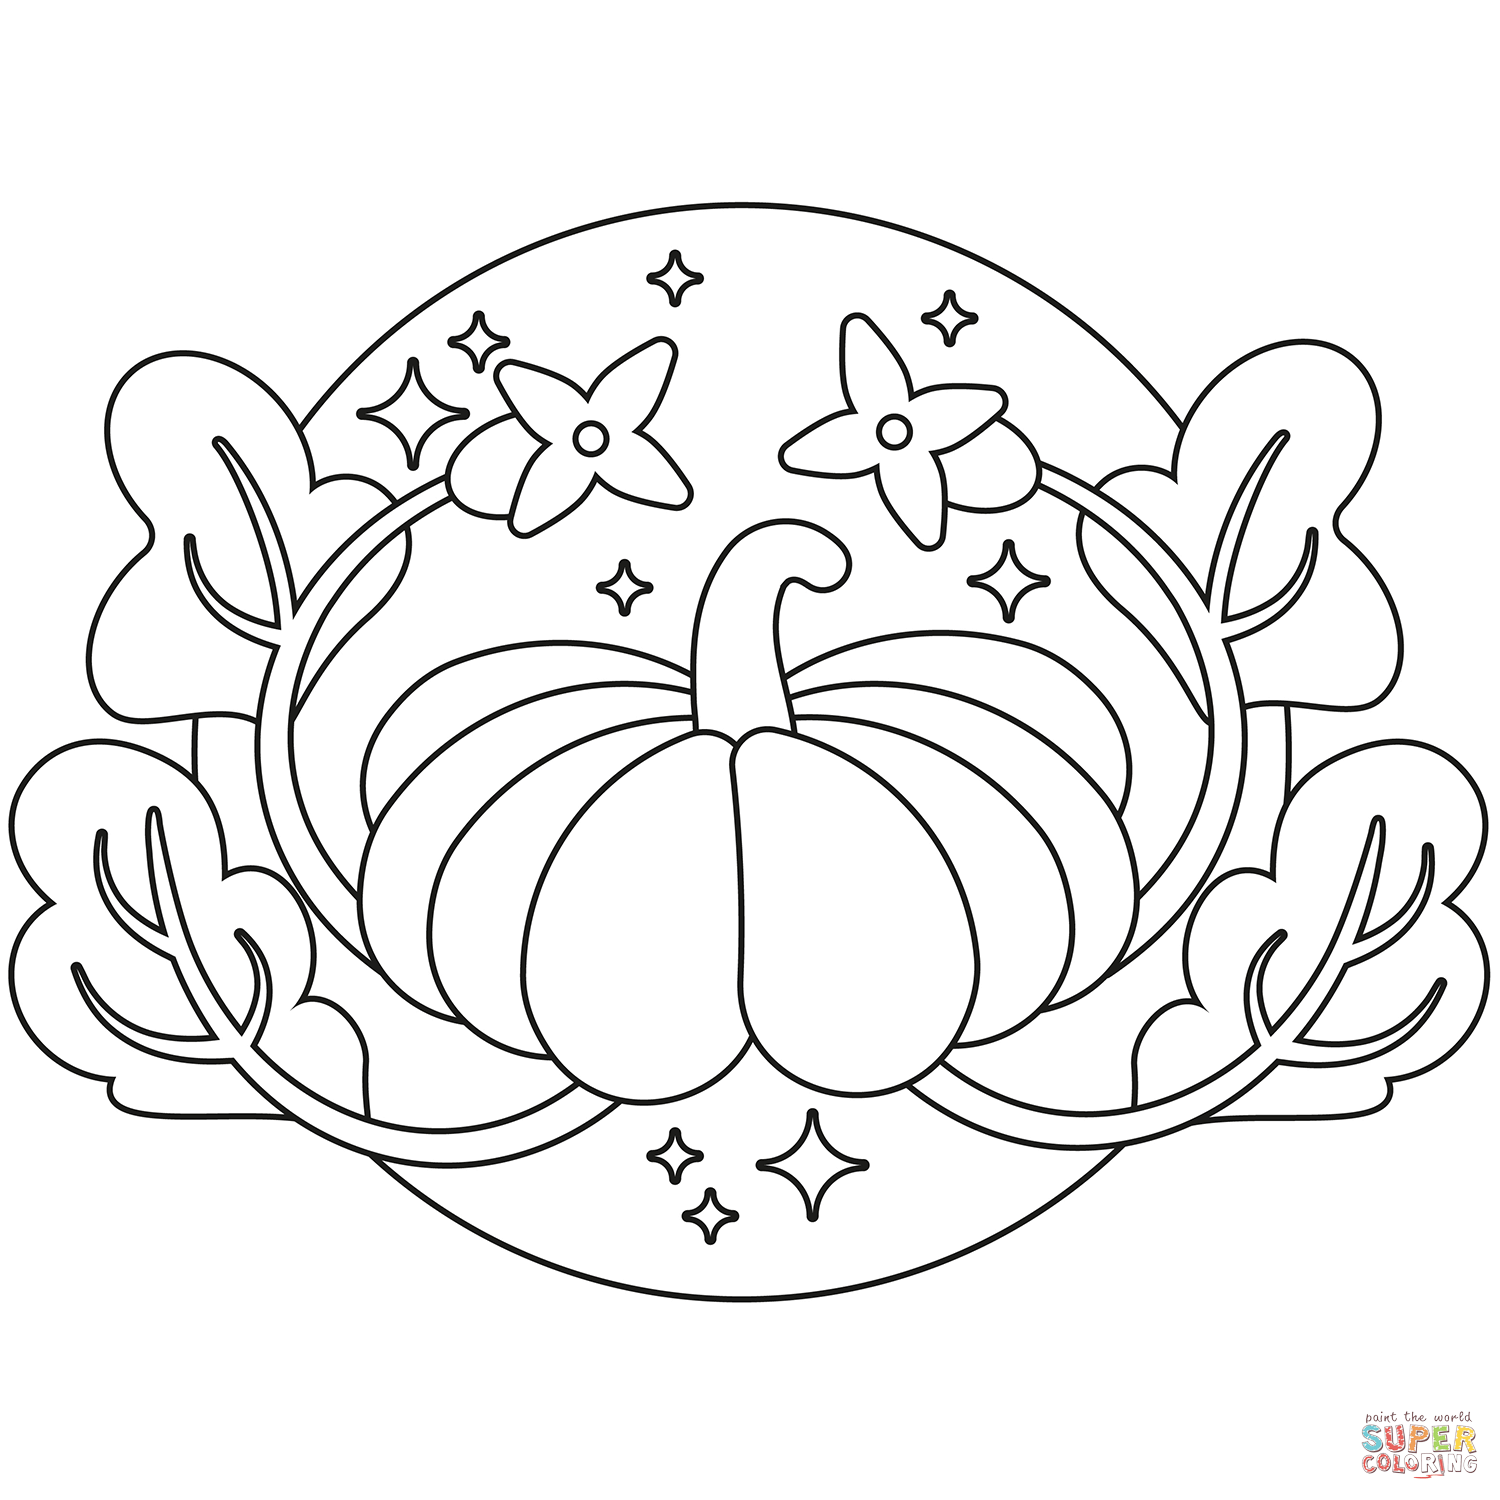 Pumpkin coloring page free printable coloring pages